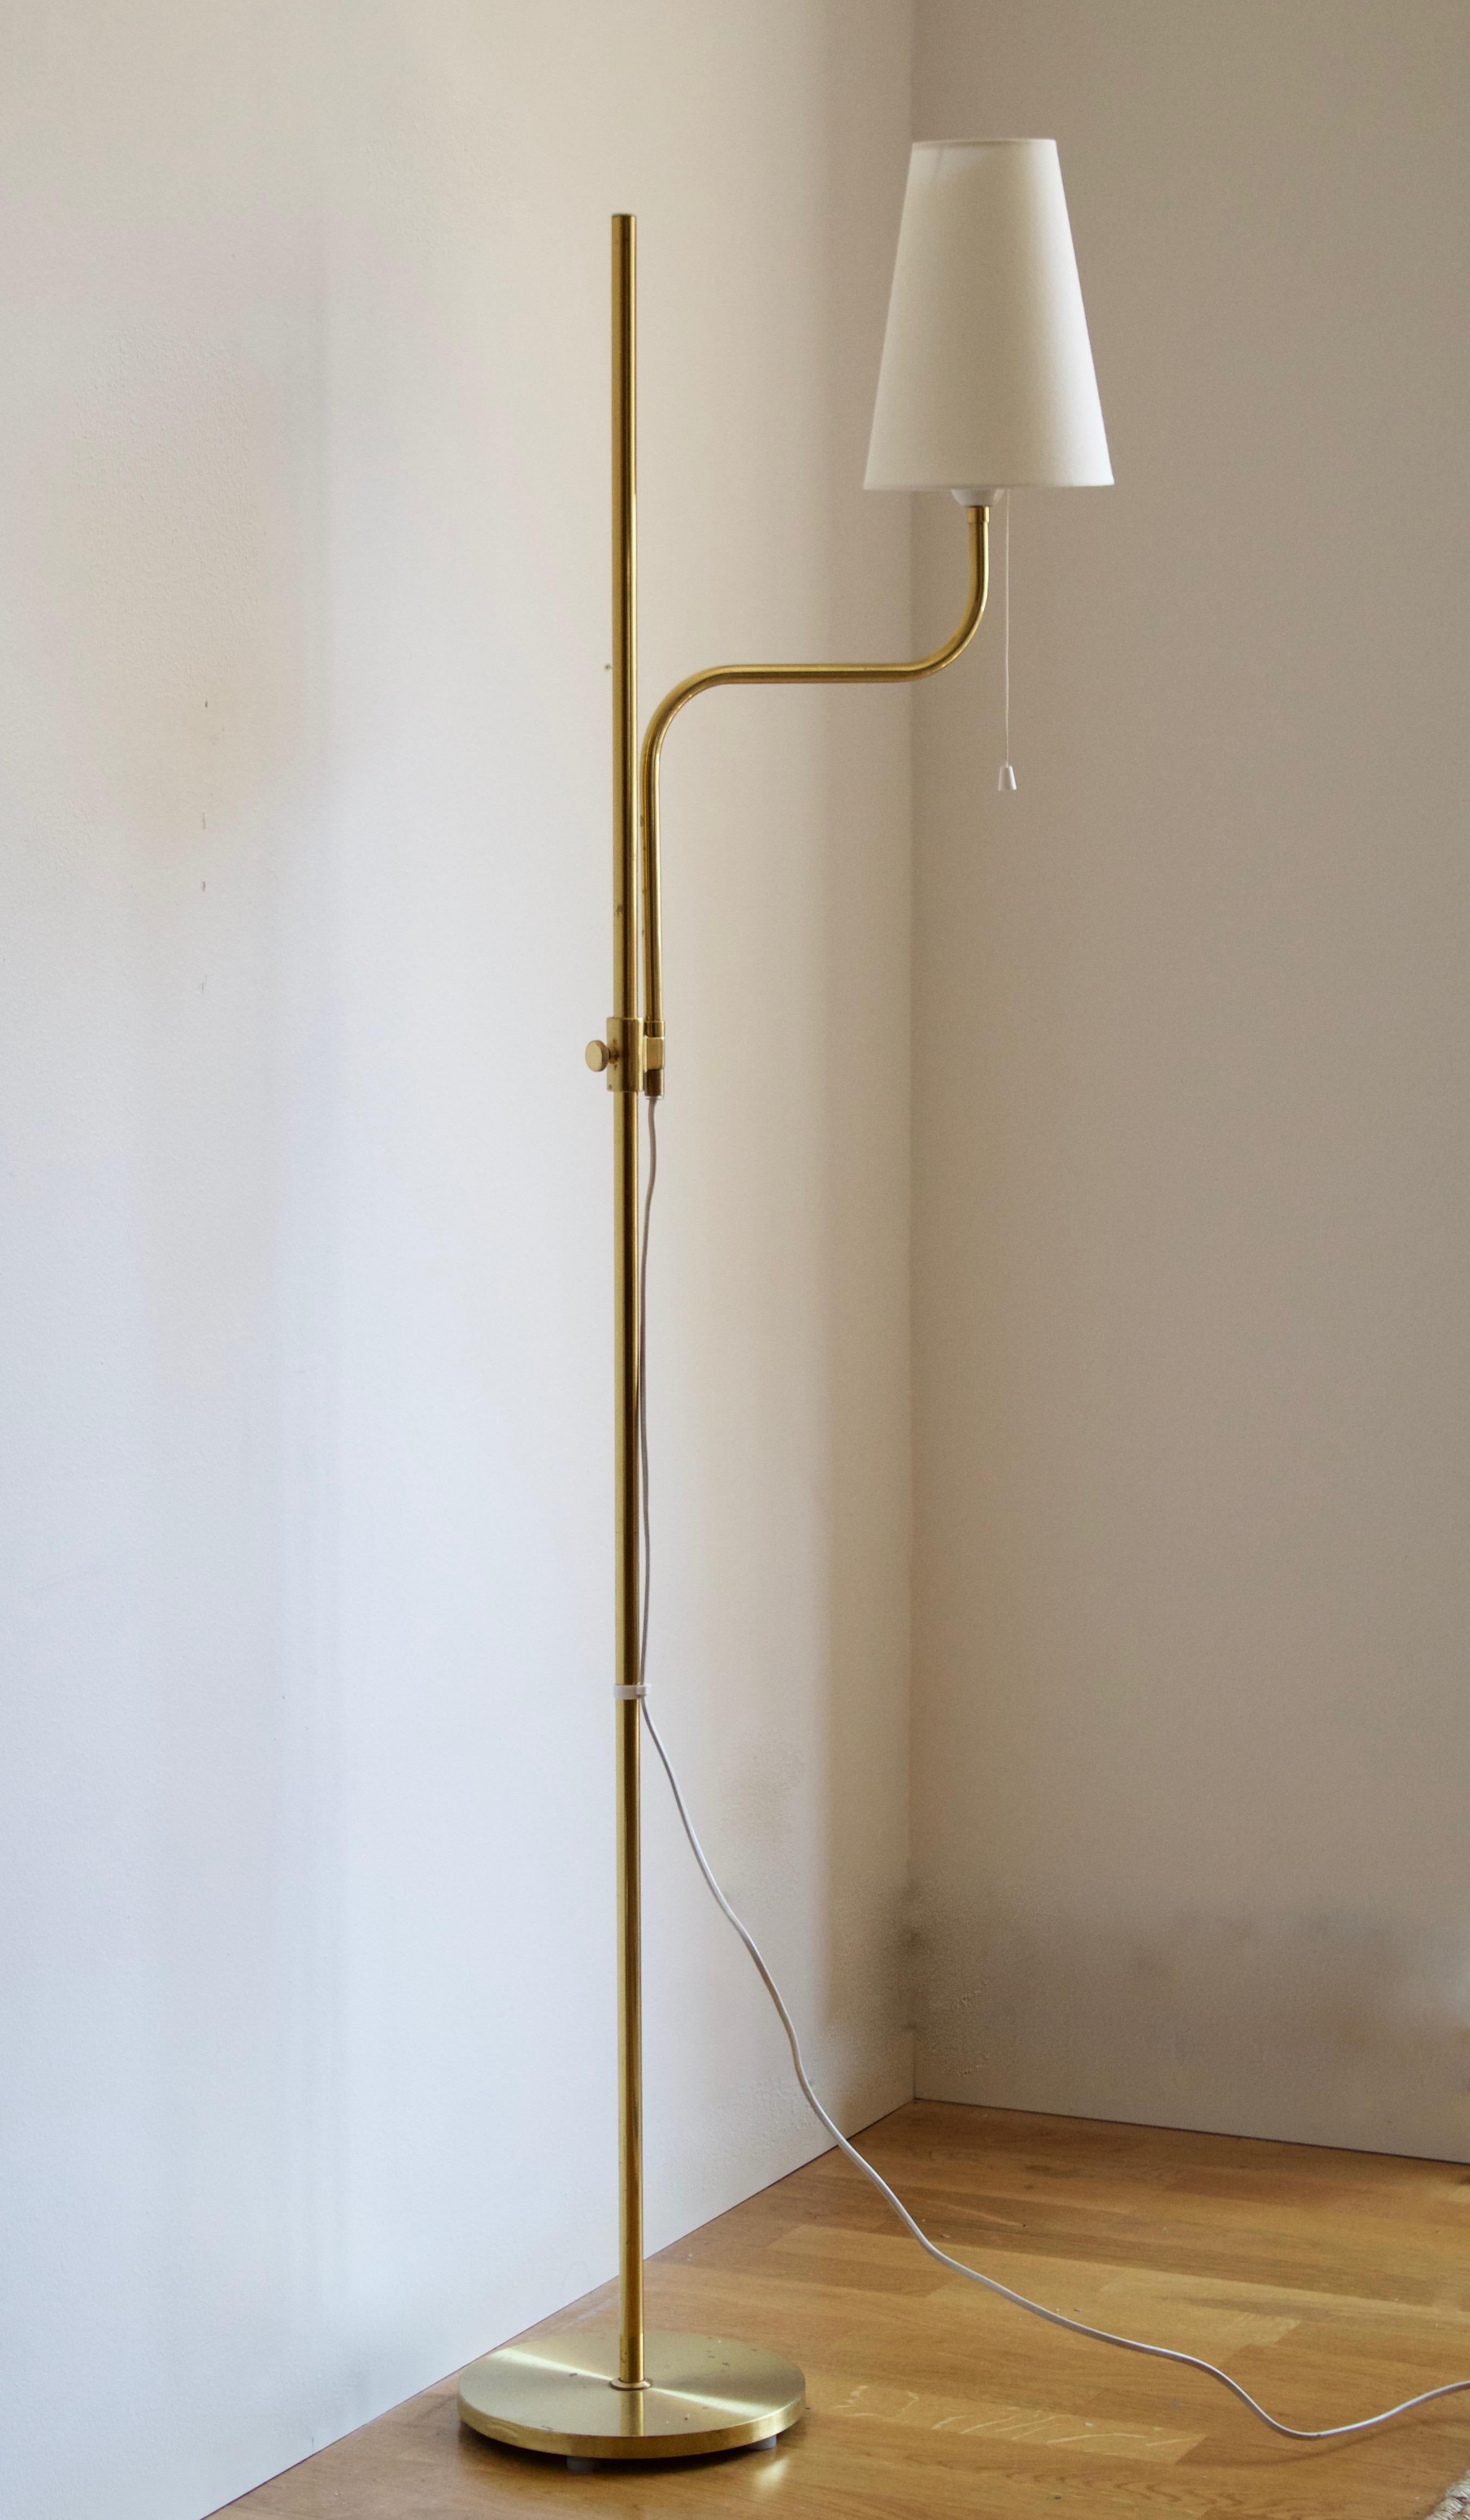 A floor lamp produced by Swedish firm Ewå Värnamo. Brand new lampshade.

Adjustable height. Stated dimensions as illustrated.

Other designers of the period include Paavo Tynell, Hans Agne Jacobsen, Josef Frank, and Serge Mouille.
 